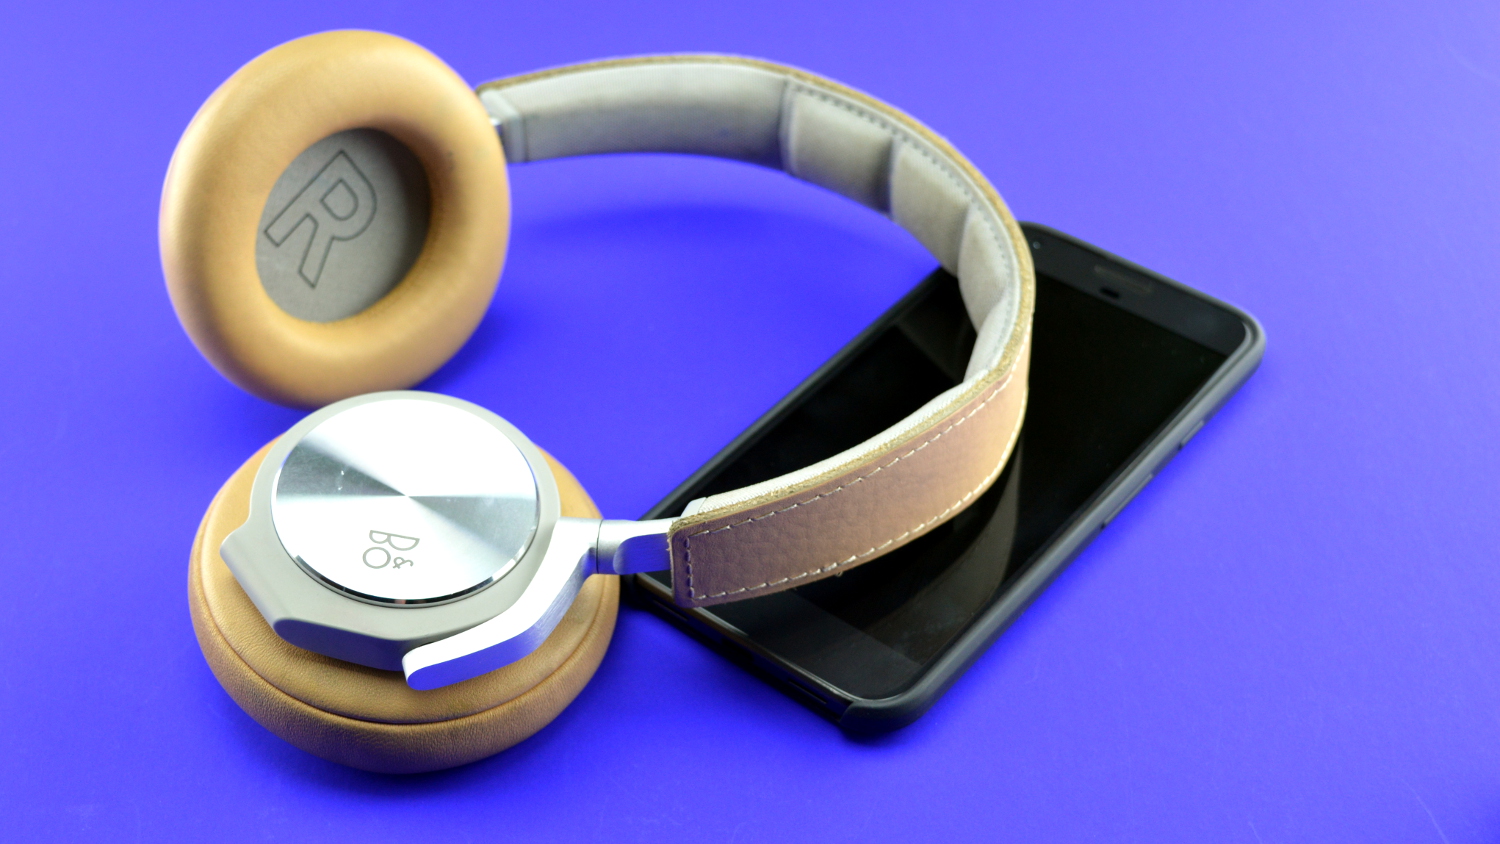 B&O Beoplay H6 Over-Ear Headphones Review - Headphone Review